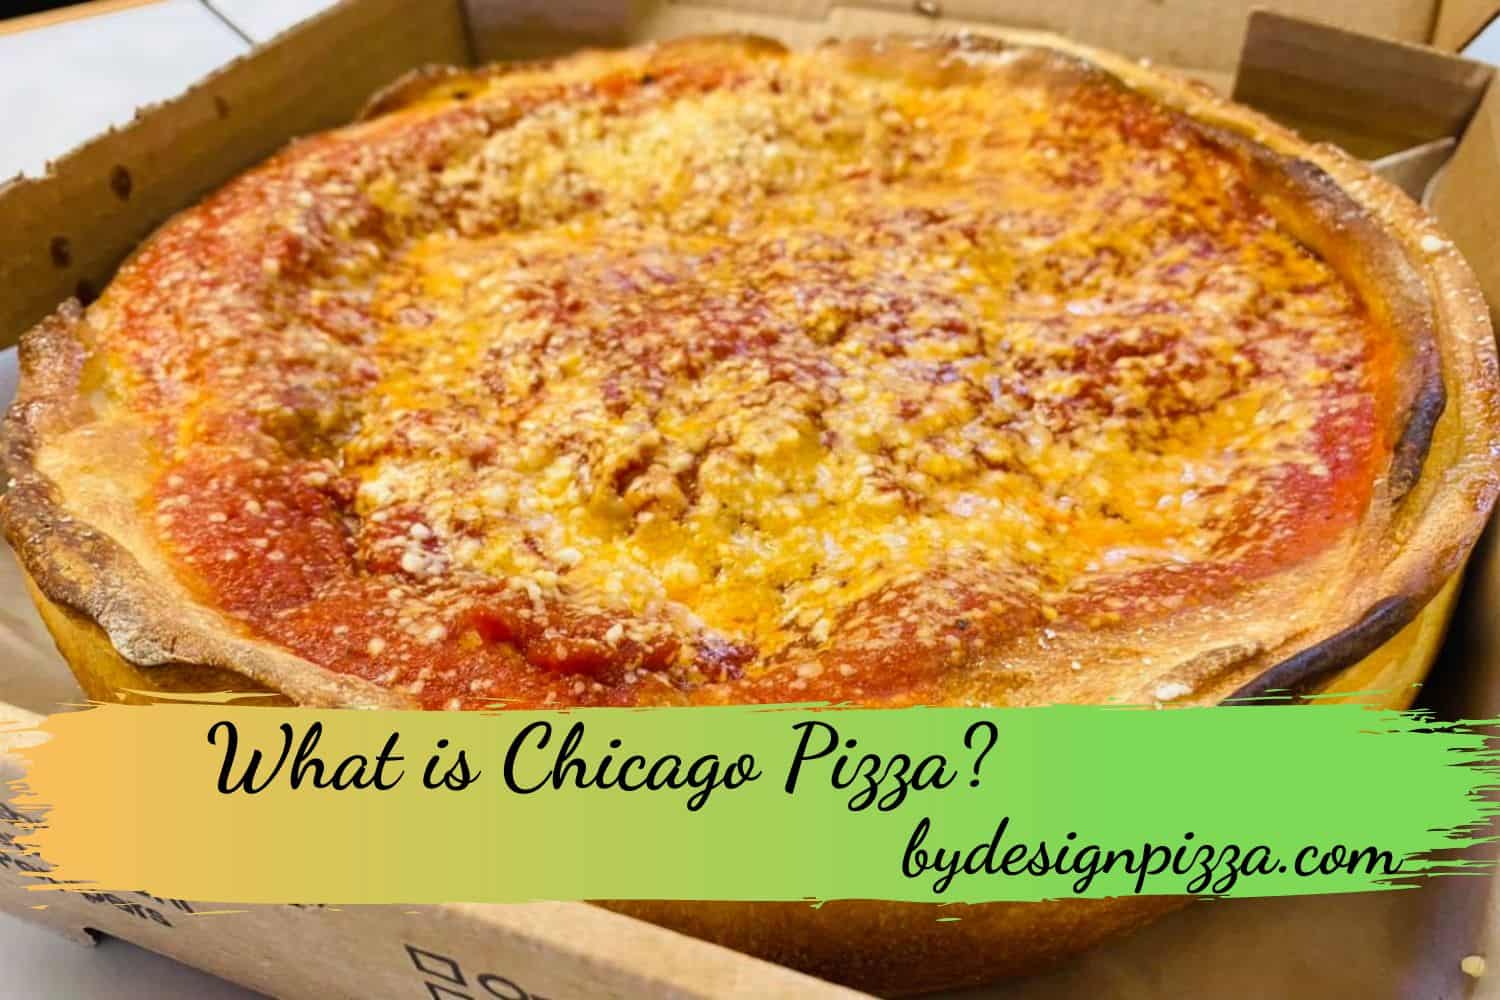 What is Chicago Pizza?